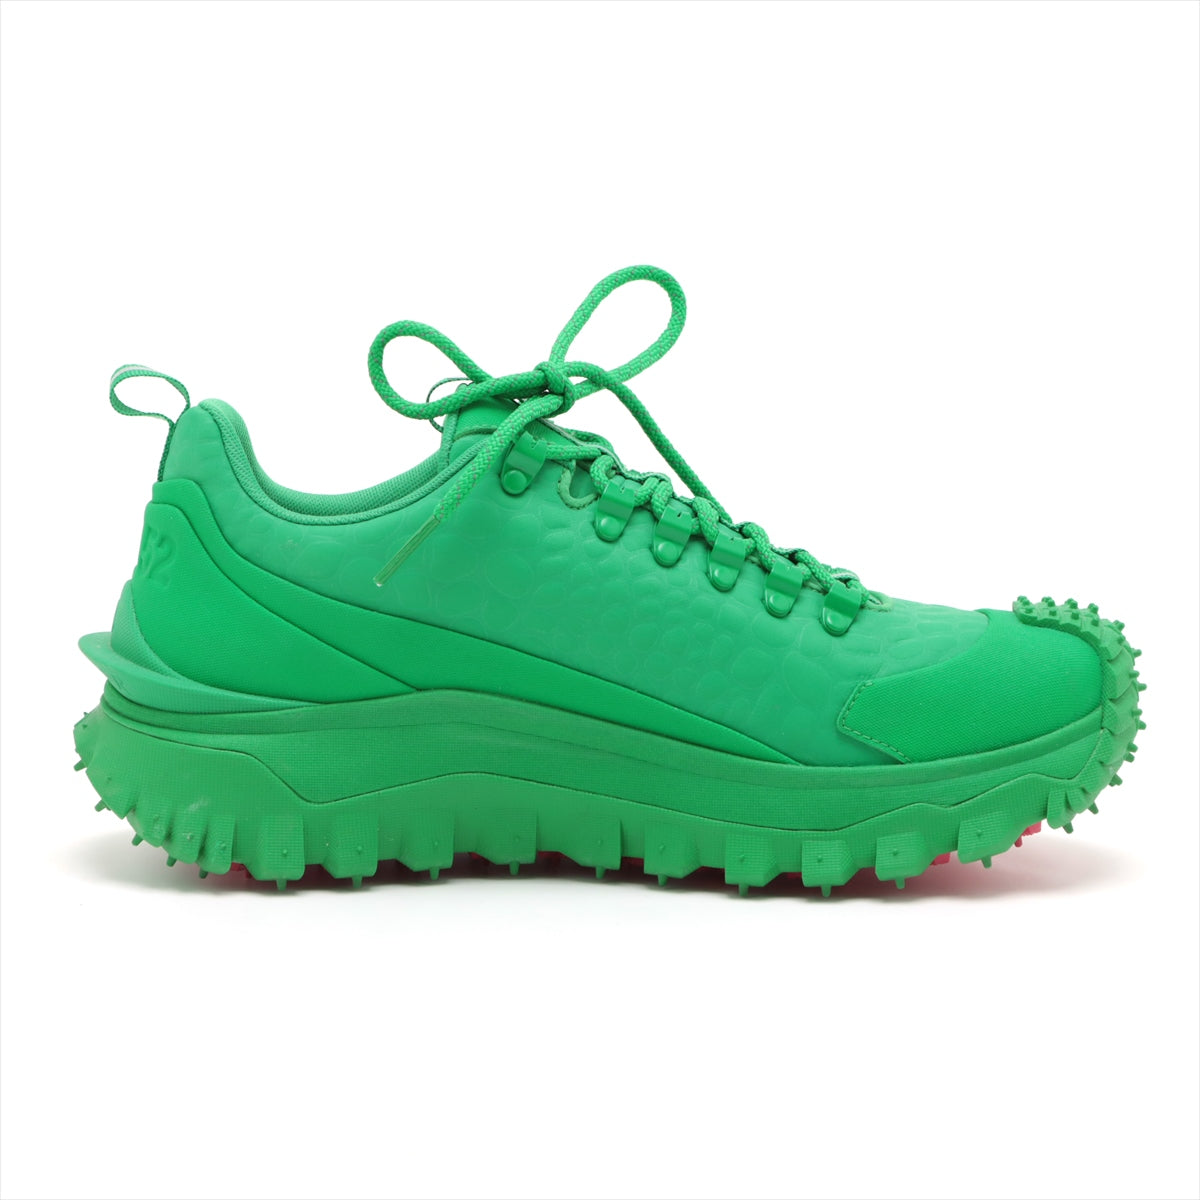 Moncler Genius 1952 Fabric Sneakers 43.5 Men's Green TRAILGRIP Is there a replacement string